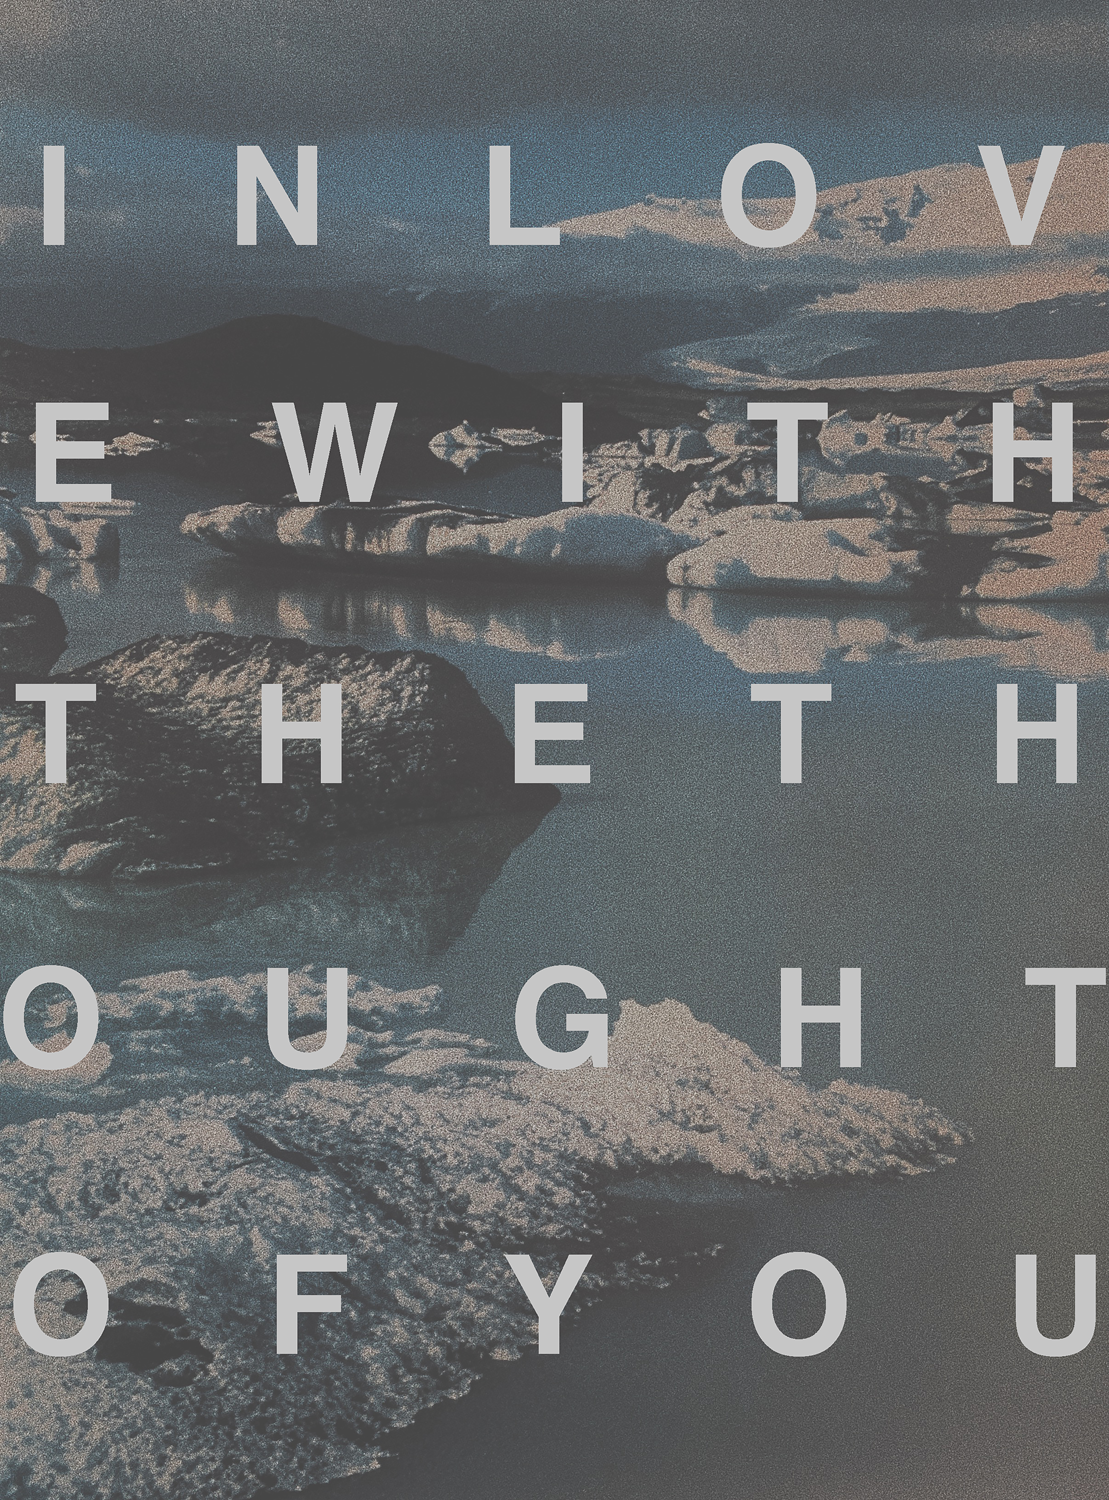 text layered on greyscale lake and mountain landscape